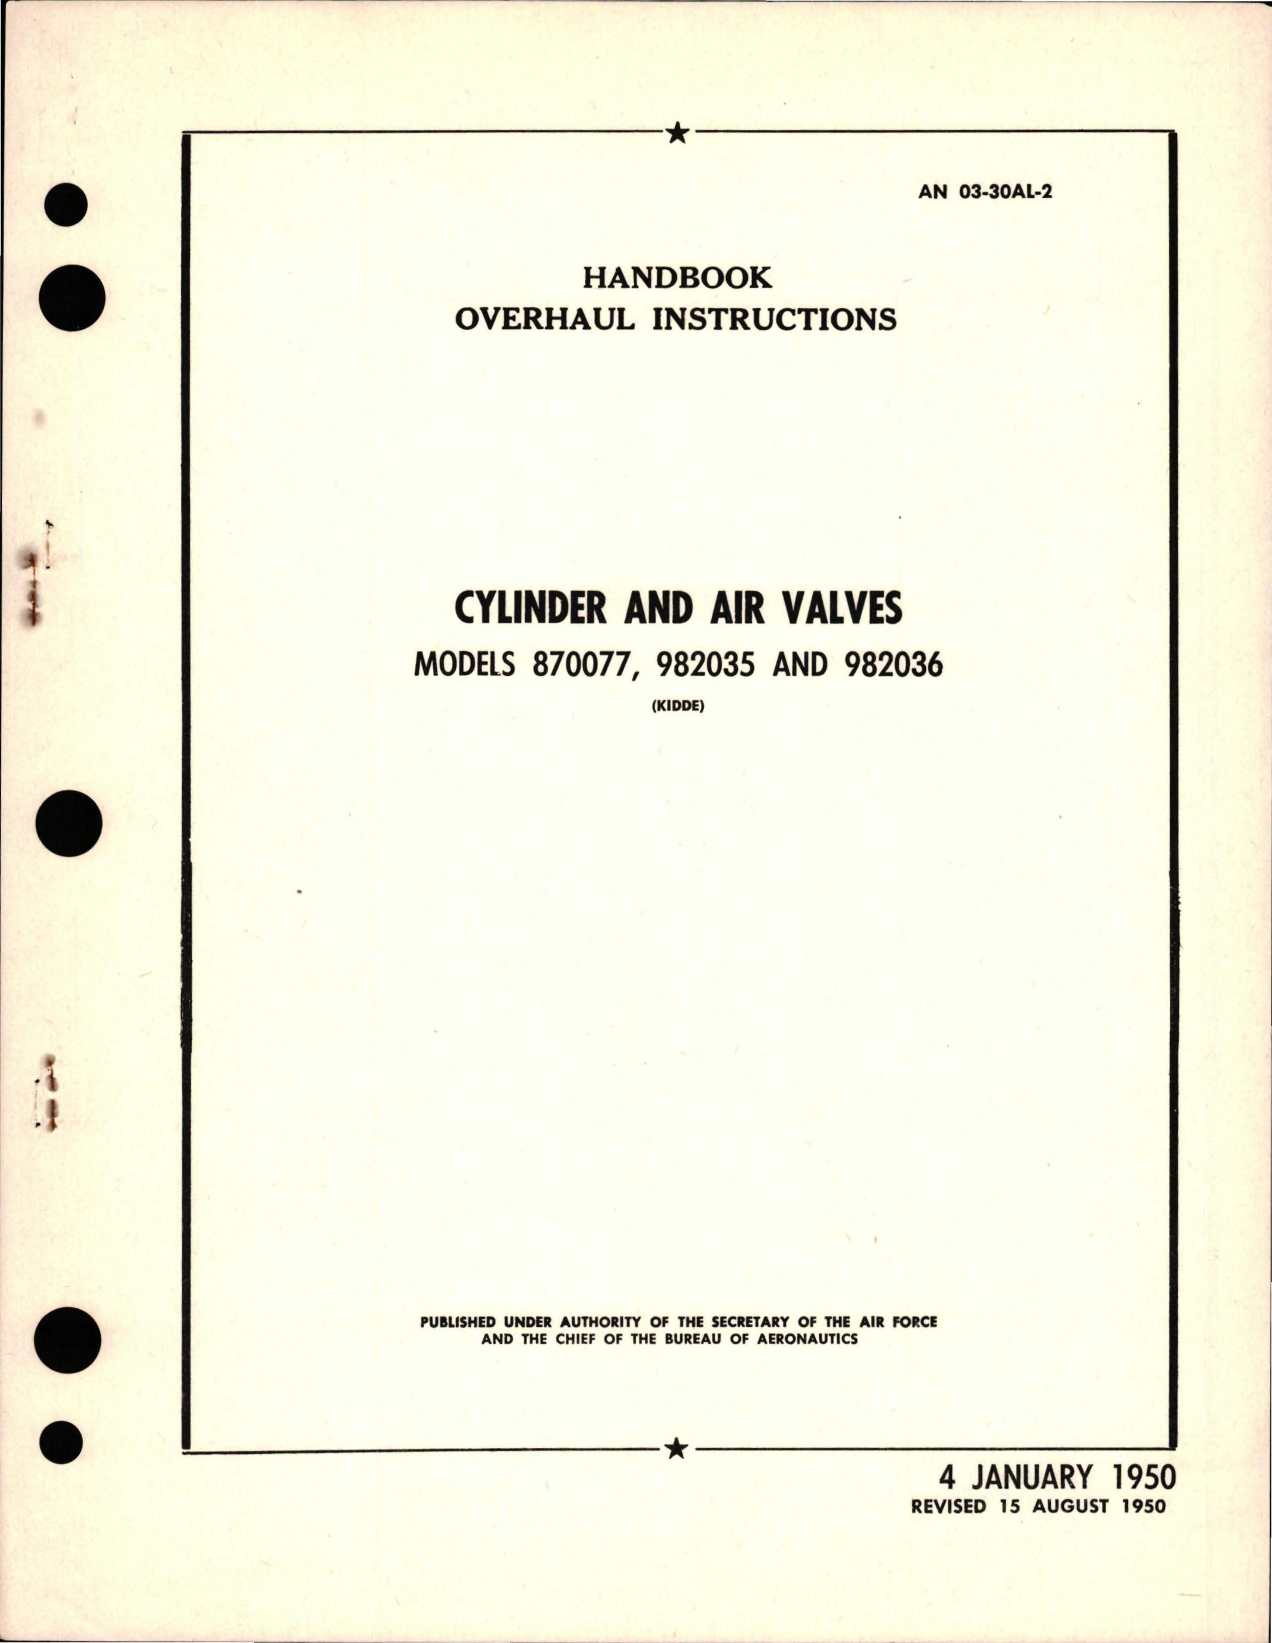 Sample page 1 from AirCorps Library document: Overhaul Instructions for Cylinder and Air Valves - Models 870077, 982035, and 982036 